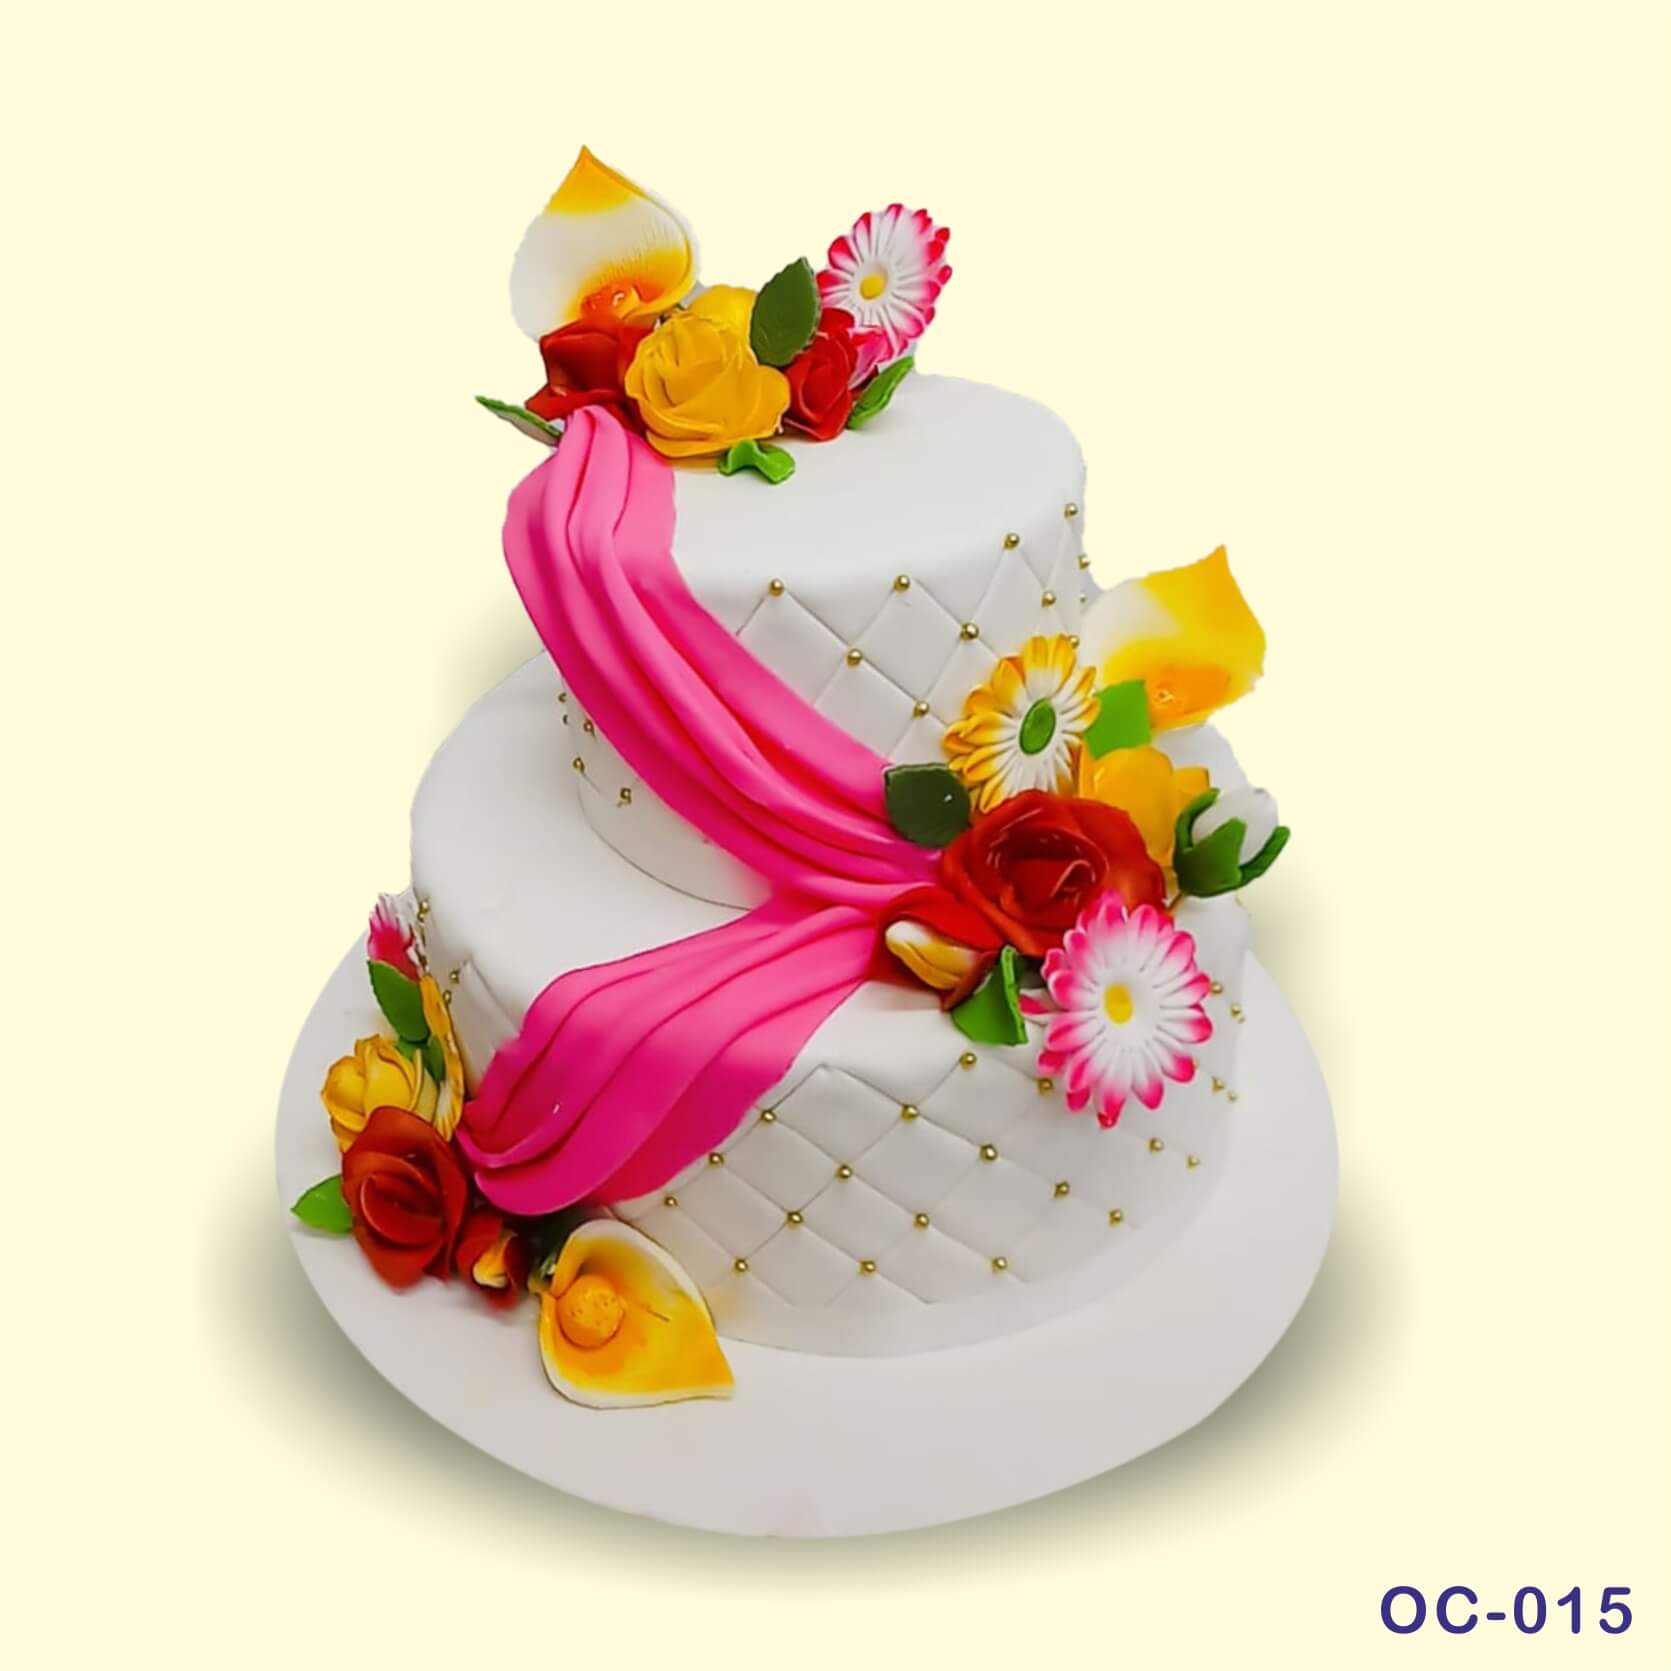 Top 5 cakes for the anniversary - CakenGifts.in